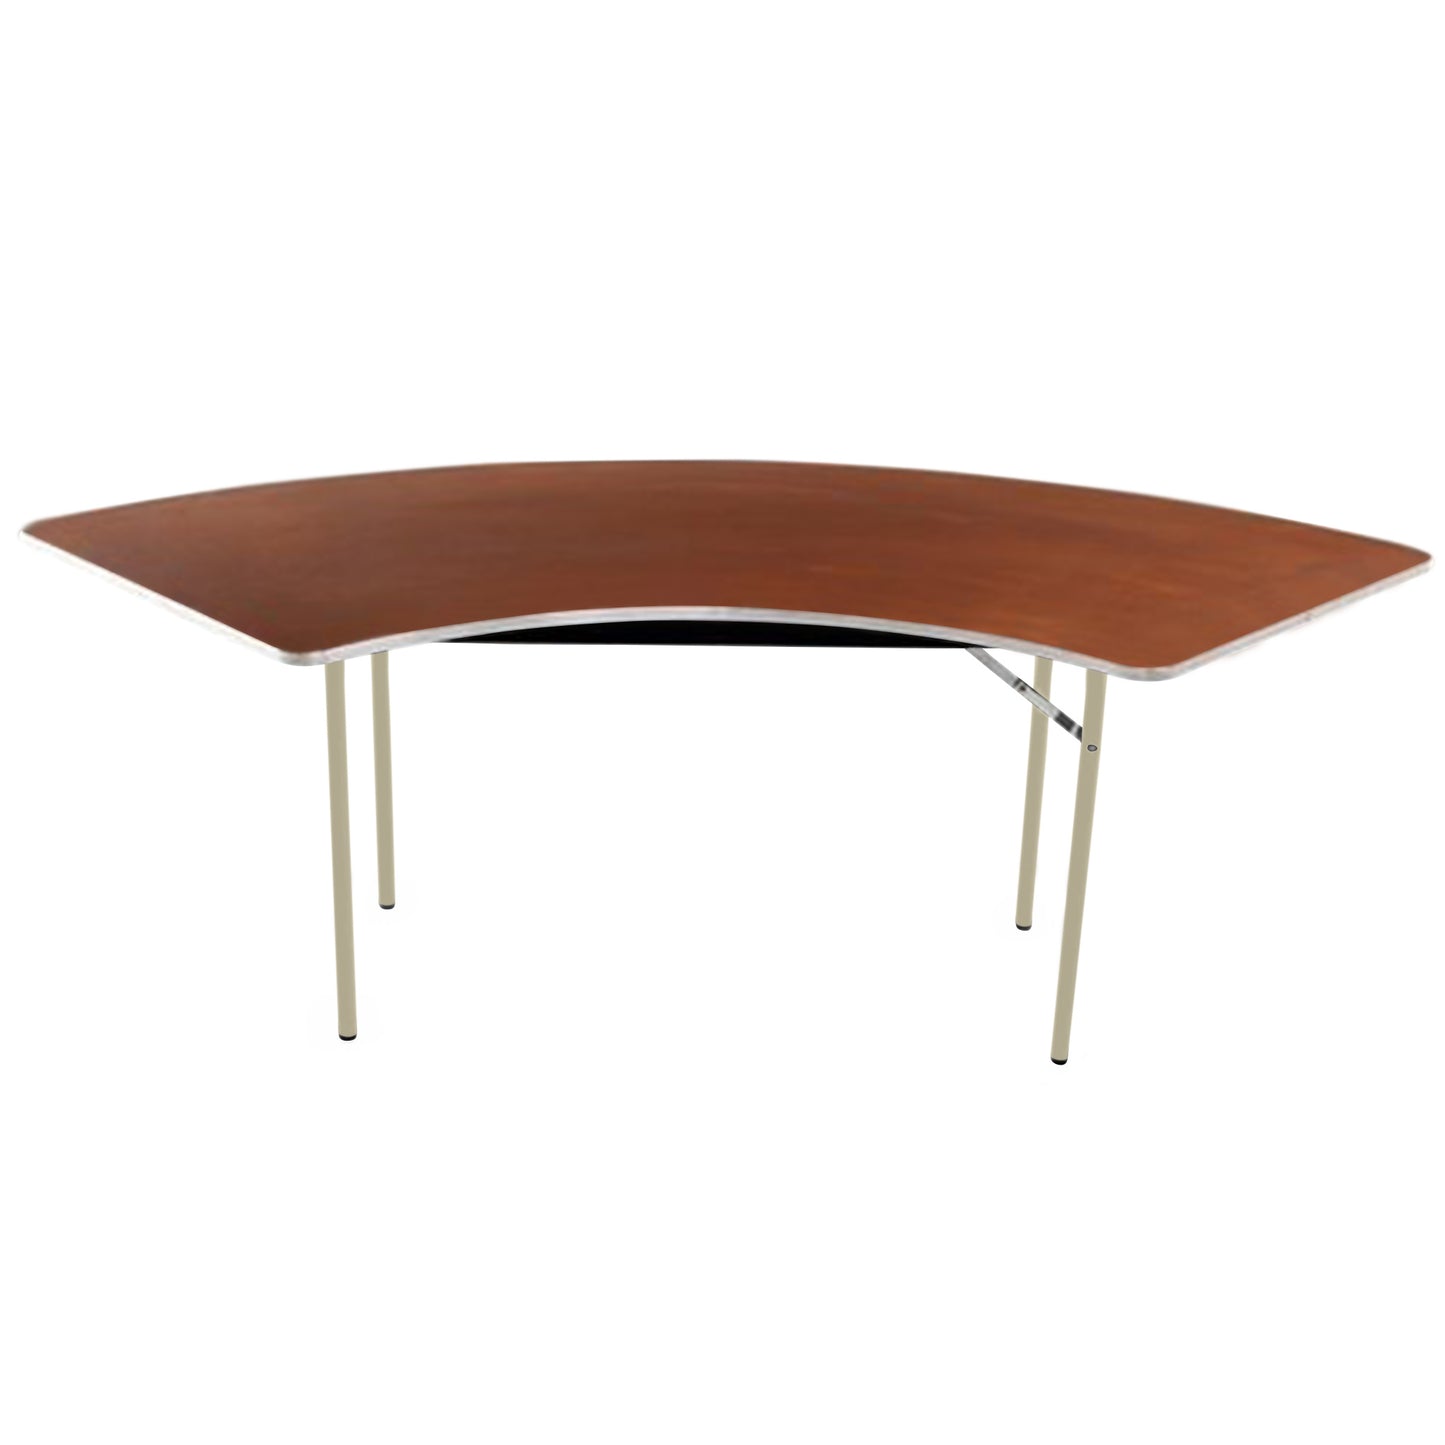 AmTab Folding Table - Plywood Stained and Sealed - Aluminum Edge - Serpentine - 30"W x 30,60"L x 29"H  (AmTab AMT-SE305PA)